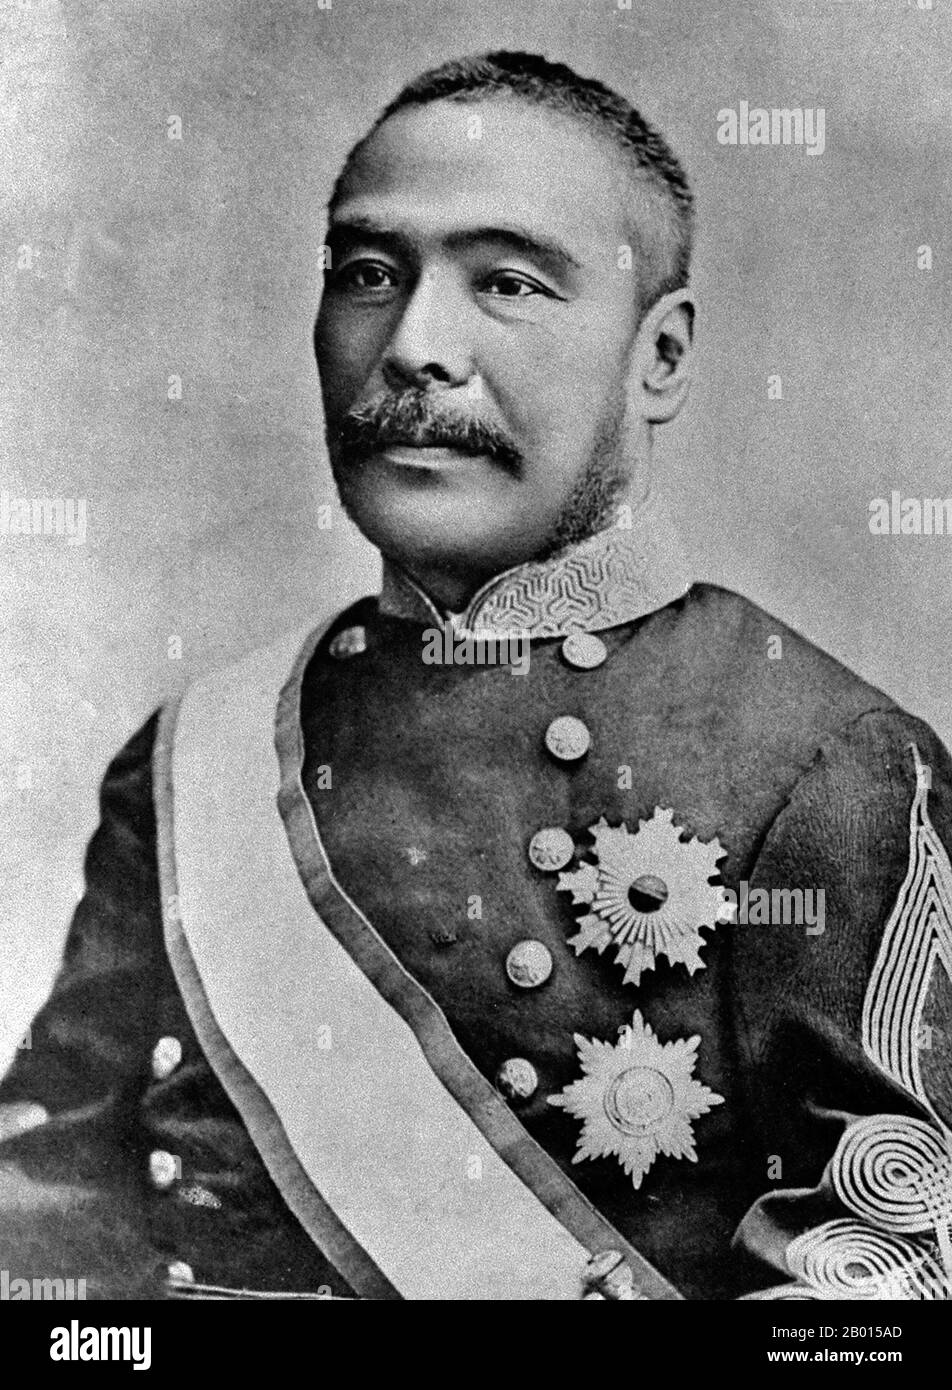 Japan: Count Kuroda Kiyotaka (16 October 1840 - 23 August 1900), Prime Minister of Japan from (1888-1889).  Count Kuroda Kiyotaka was a Japanese politician of the Meiji era, and the second Prime Minister of Japan. Born into a samurai family, he had been part of the Anglo-Satsuma War in 1863. Under the new Meiji government, he became a pioneer-diplomat, and was put in charge of colonisation efforts in Hokkaido in 1872, to counter Russia's push eastwards. He helped negotiate the Japan-Korea Treaty of 1876, and aided in the suppression of the Satsuma Rebellion of 1877. Stock Photo